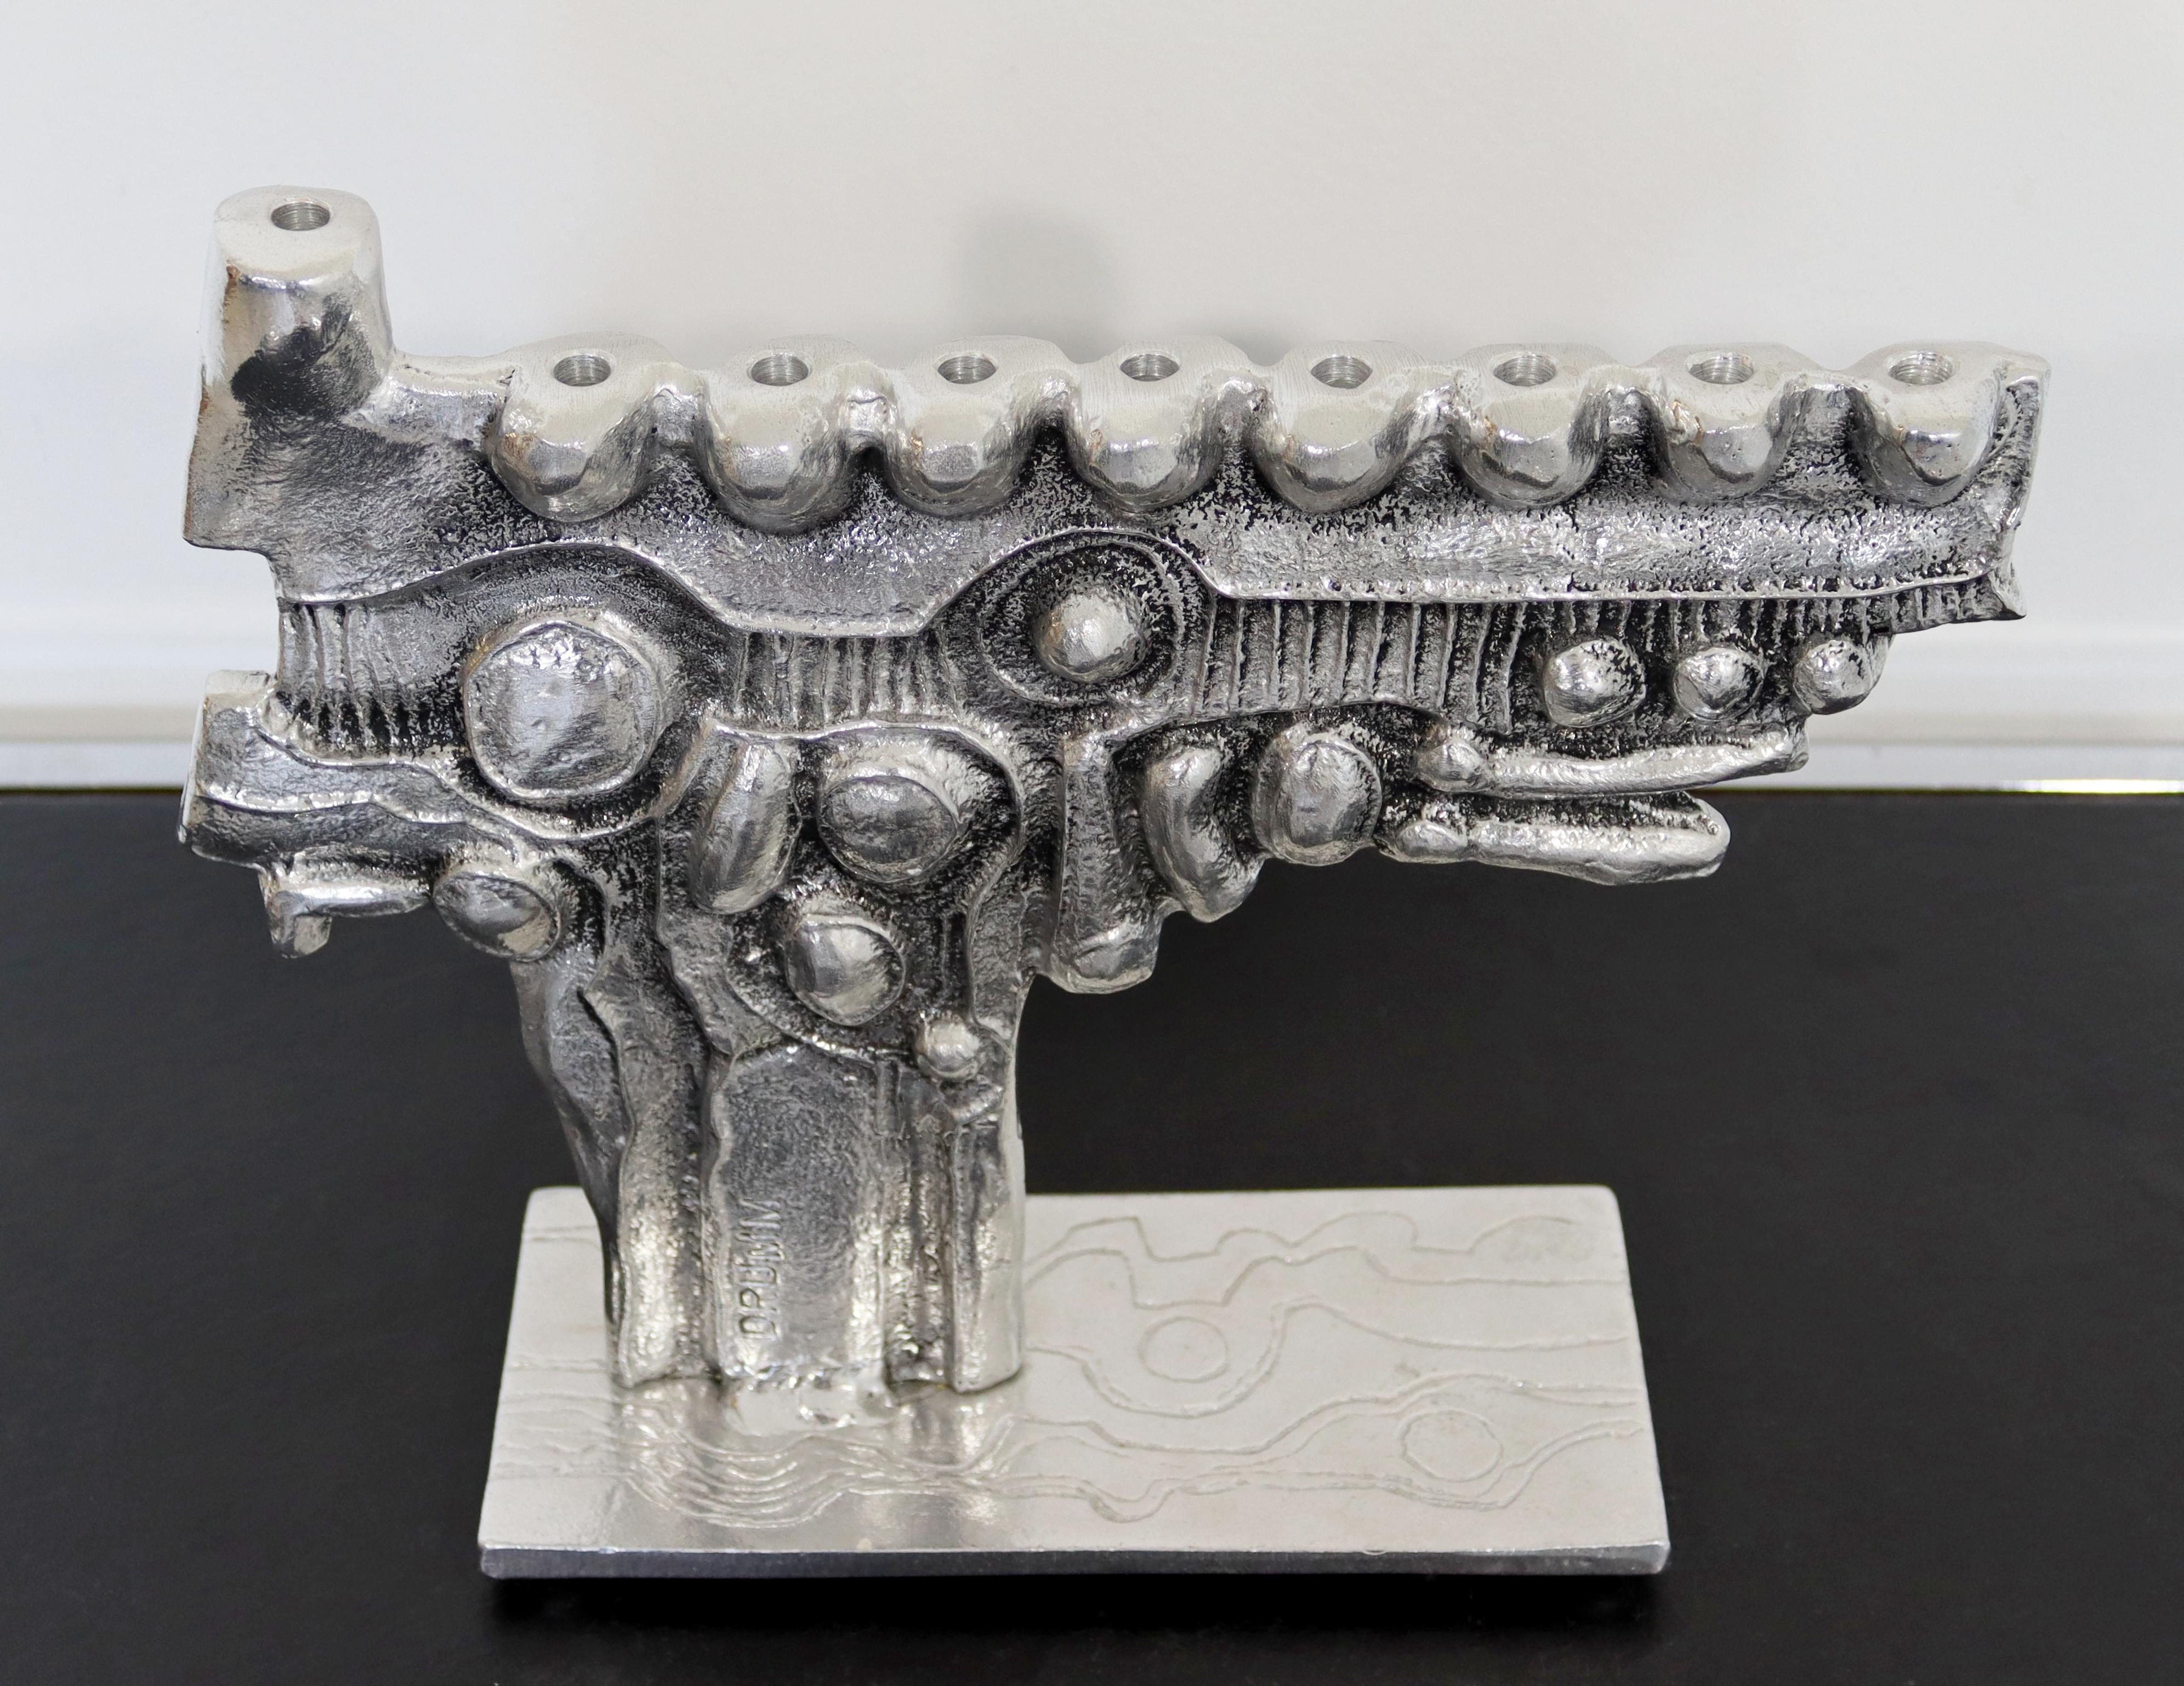 For your consideration is a beautiful, Brutalist menorah, made of aluminum, signed by Donald Drumm, circa the 1970s. In excellent vintage condition. The dimensions are 12